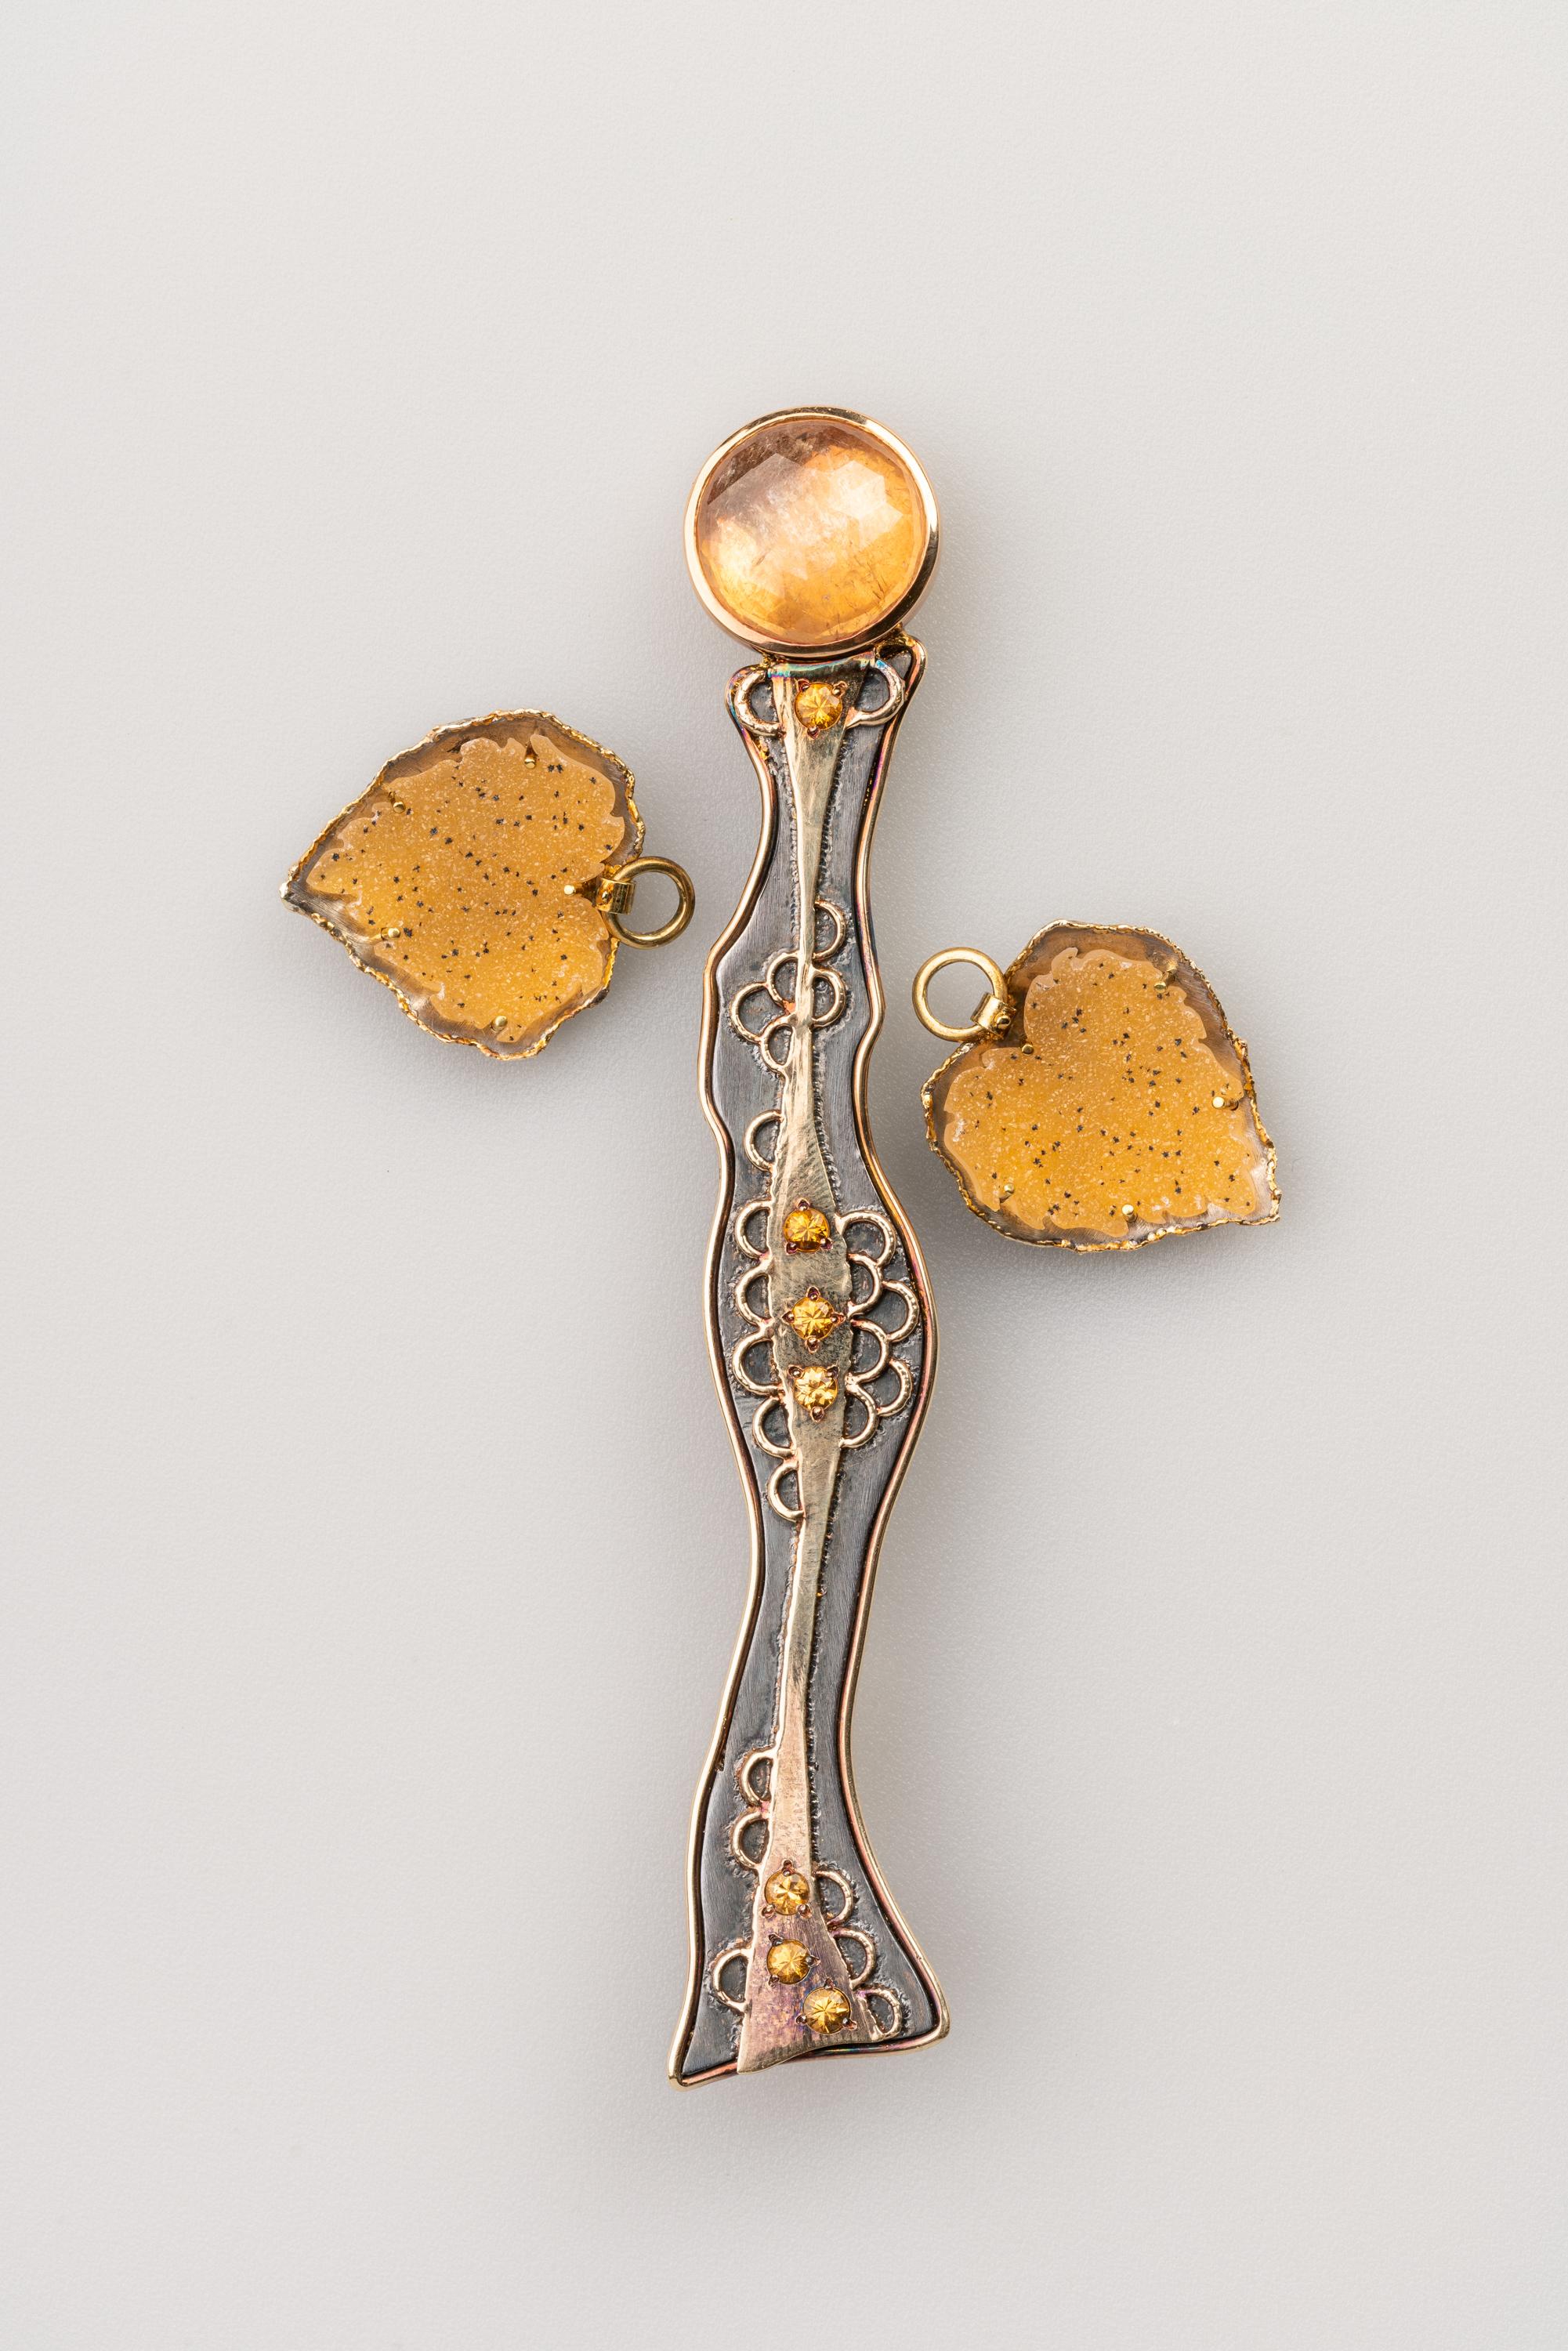 Katiana is a sterling silver and 18k yellow, rose, and white gold Modullyn brooch and pendant, set with 1.13 total carat weight of spessartite garnets and a 9.15 carat rose cut peach sapphire.  Her yellow druzy wings detach and can be worn as